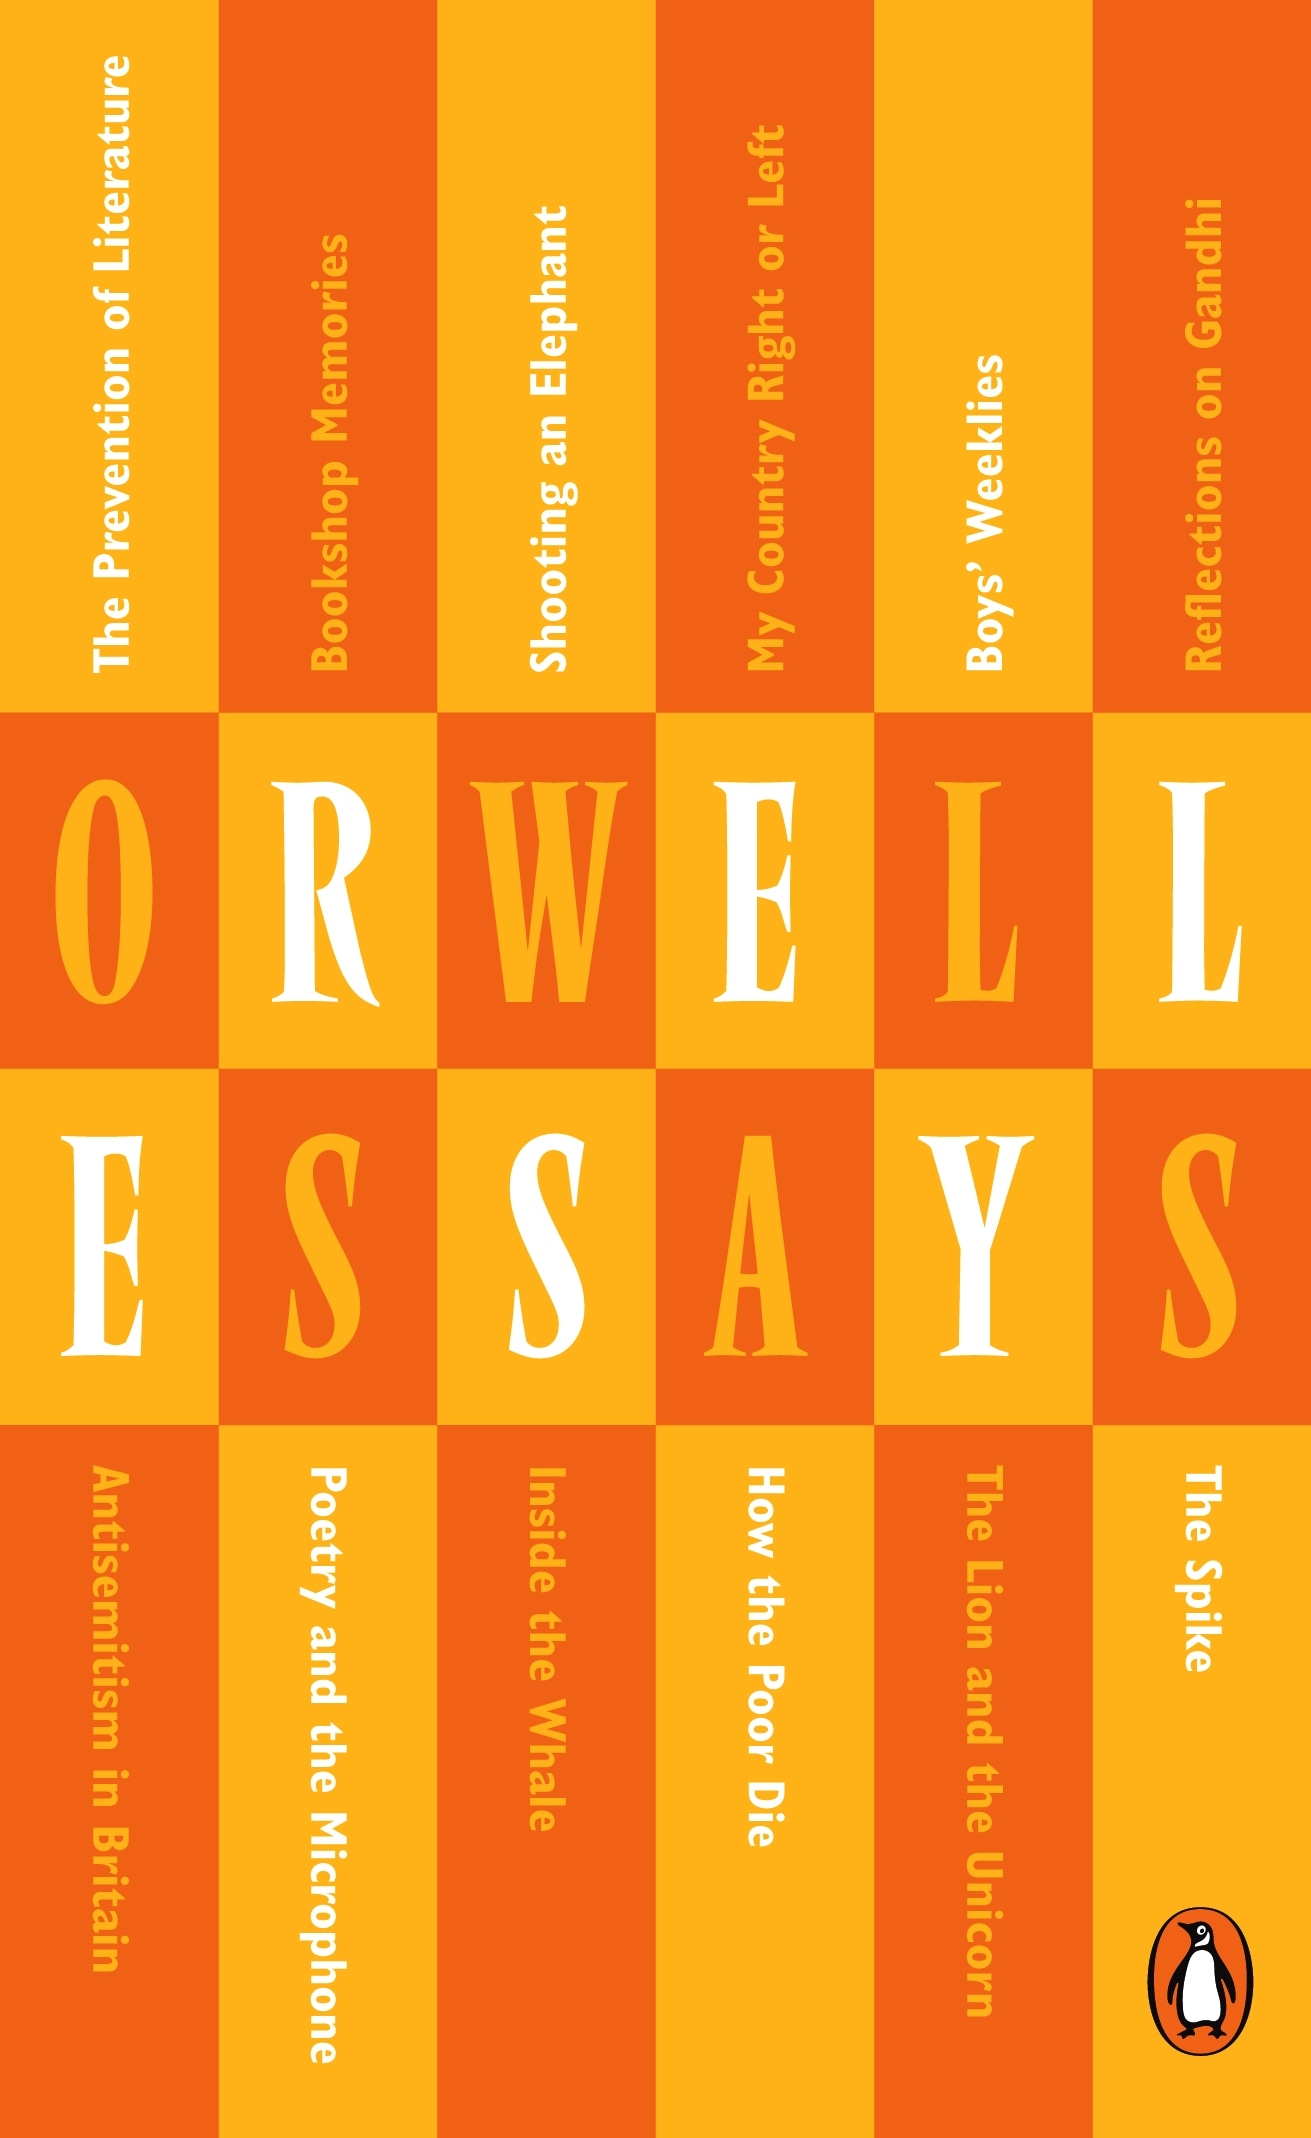 Book “Essays” by George Orwell — January 2, 2014